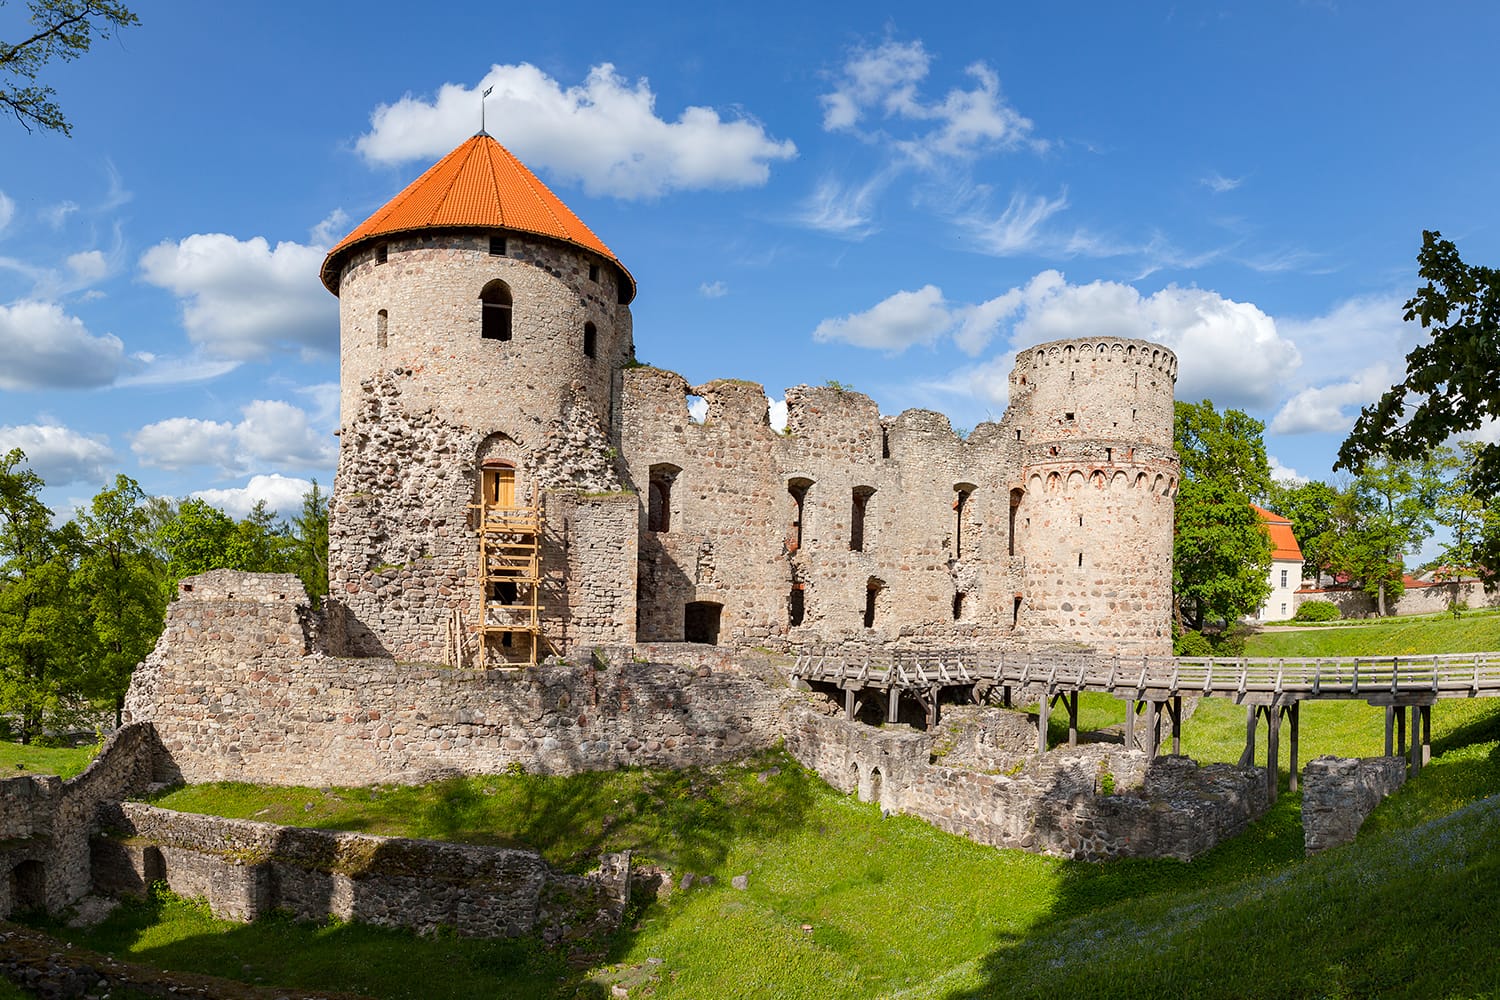 View of beautiful ruins of ancient Livonian castle in old town of Cesis, Latvia